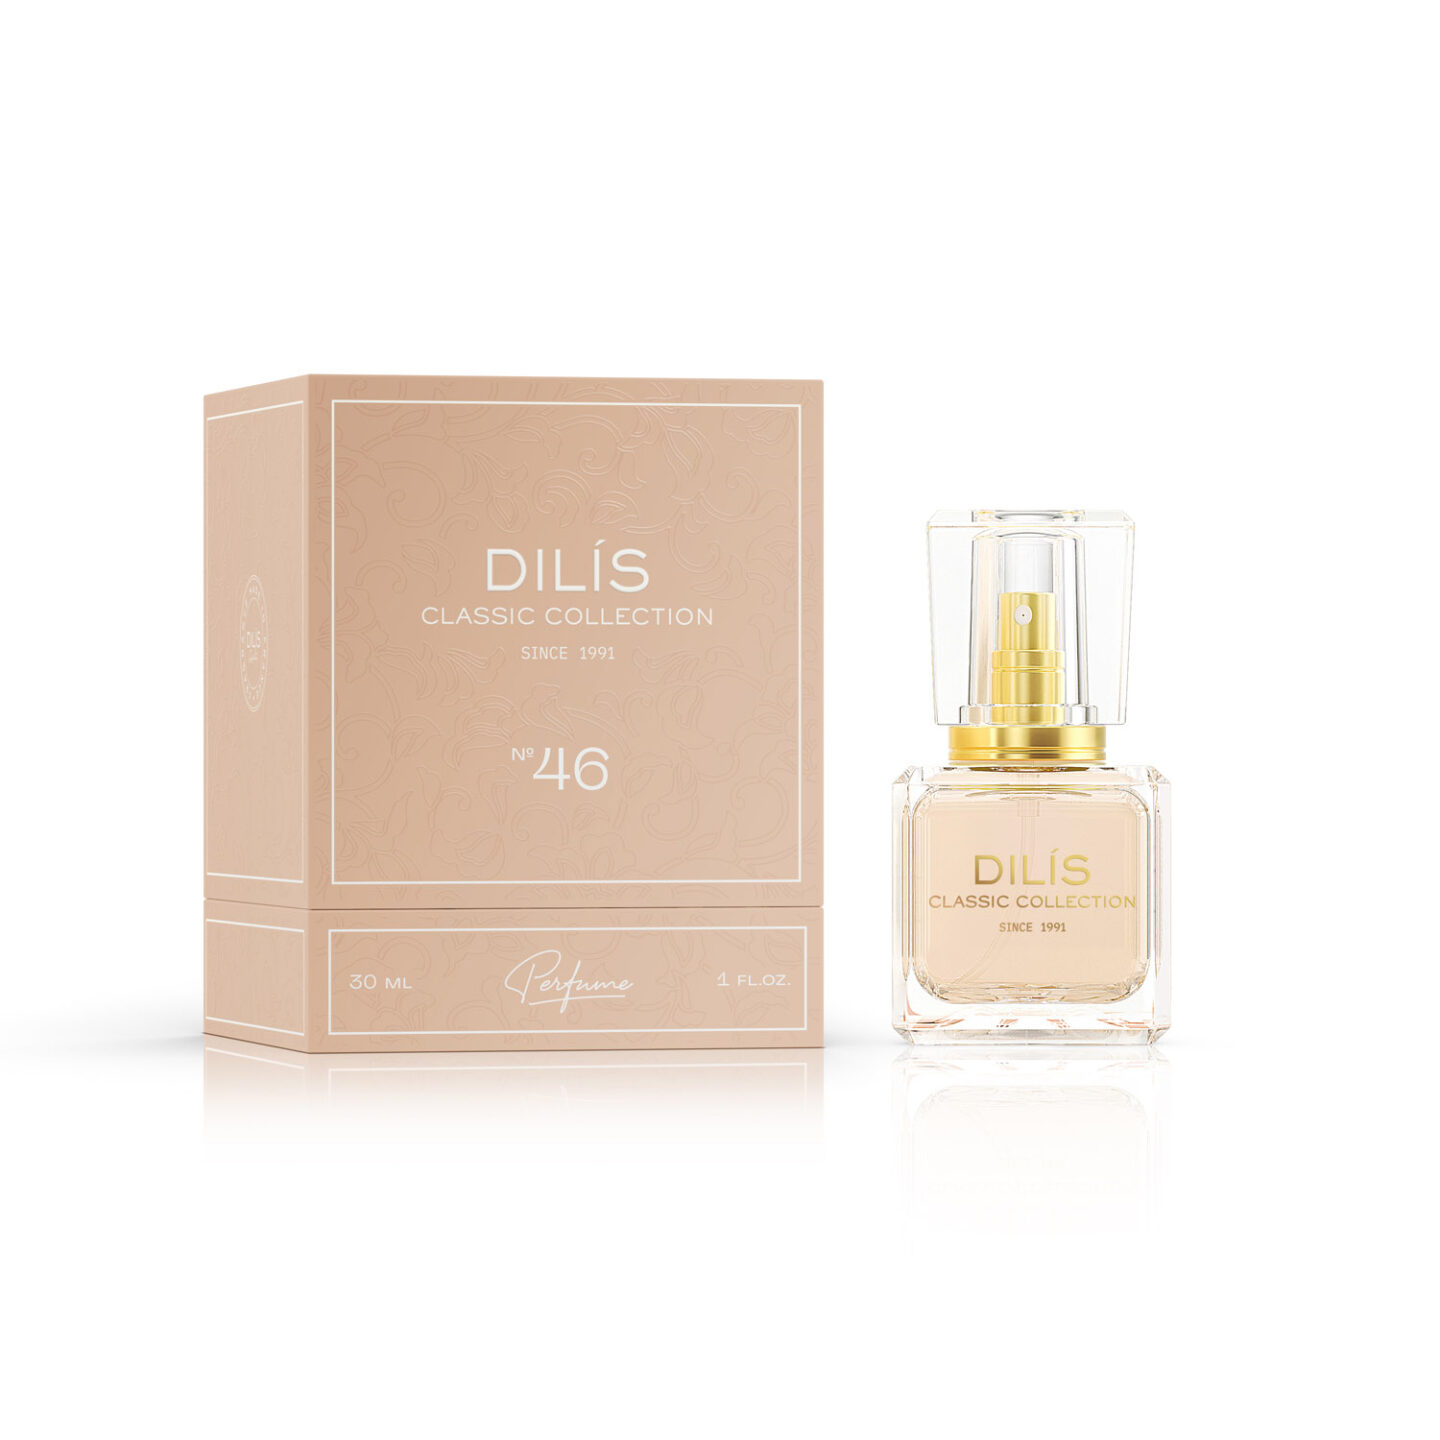 Духи женская Dilis Classic Collection №46 parfum 30 мл духи женские dilis niche collection amber rouge 50 мл